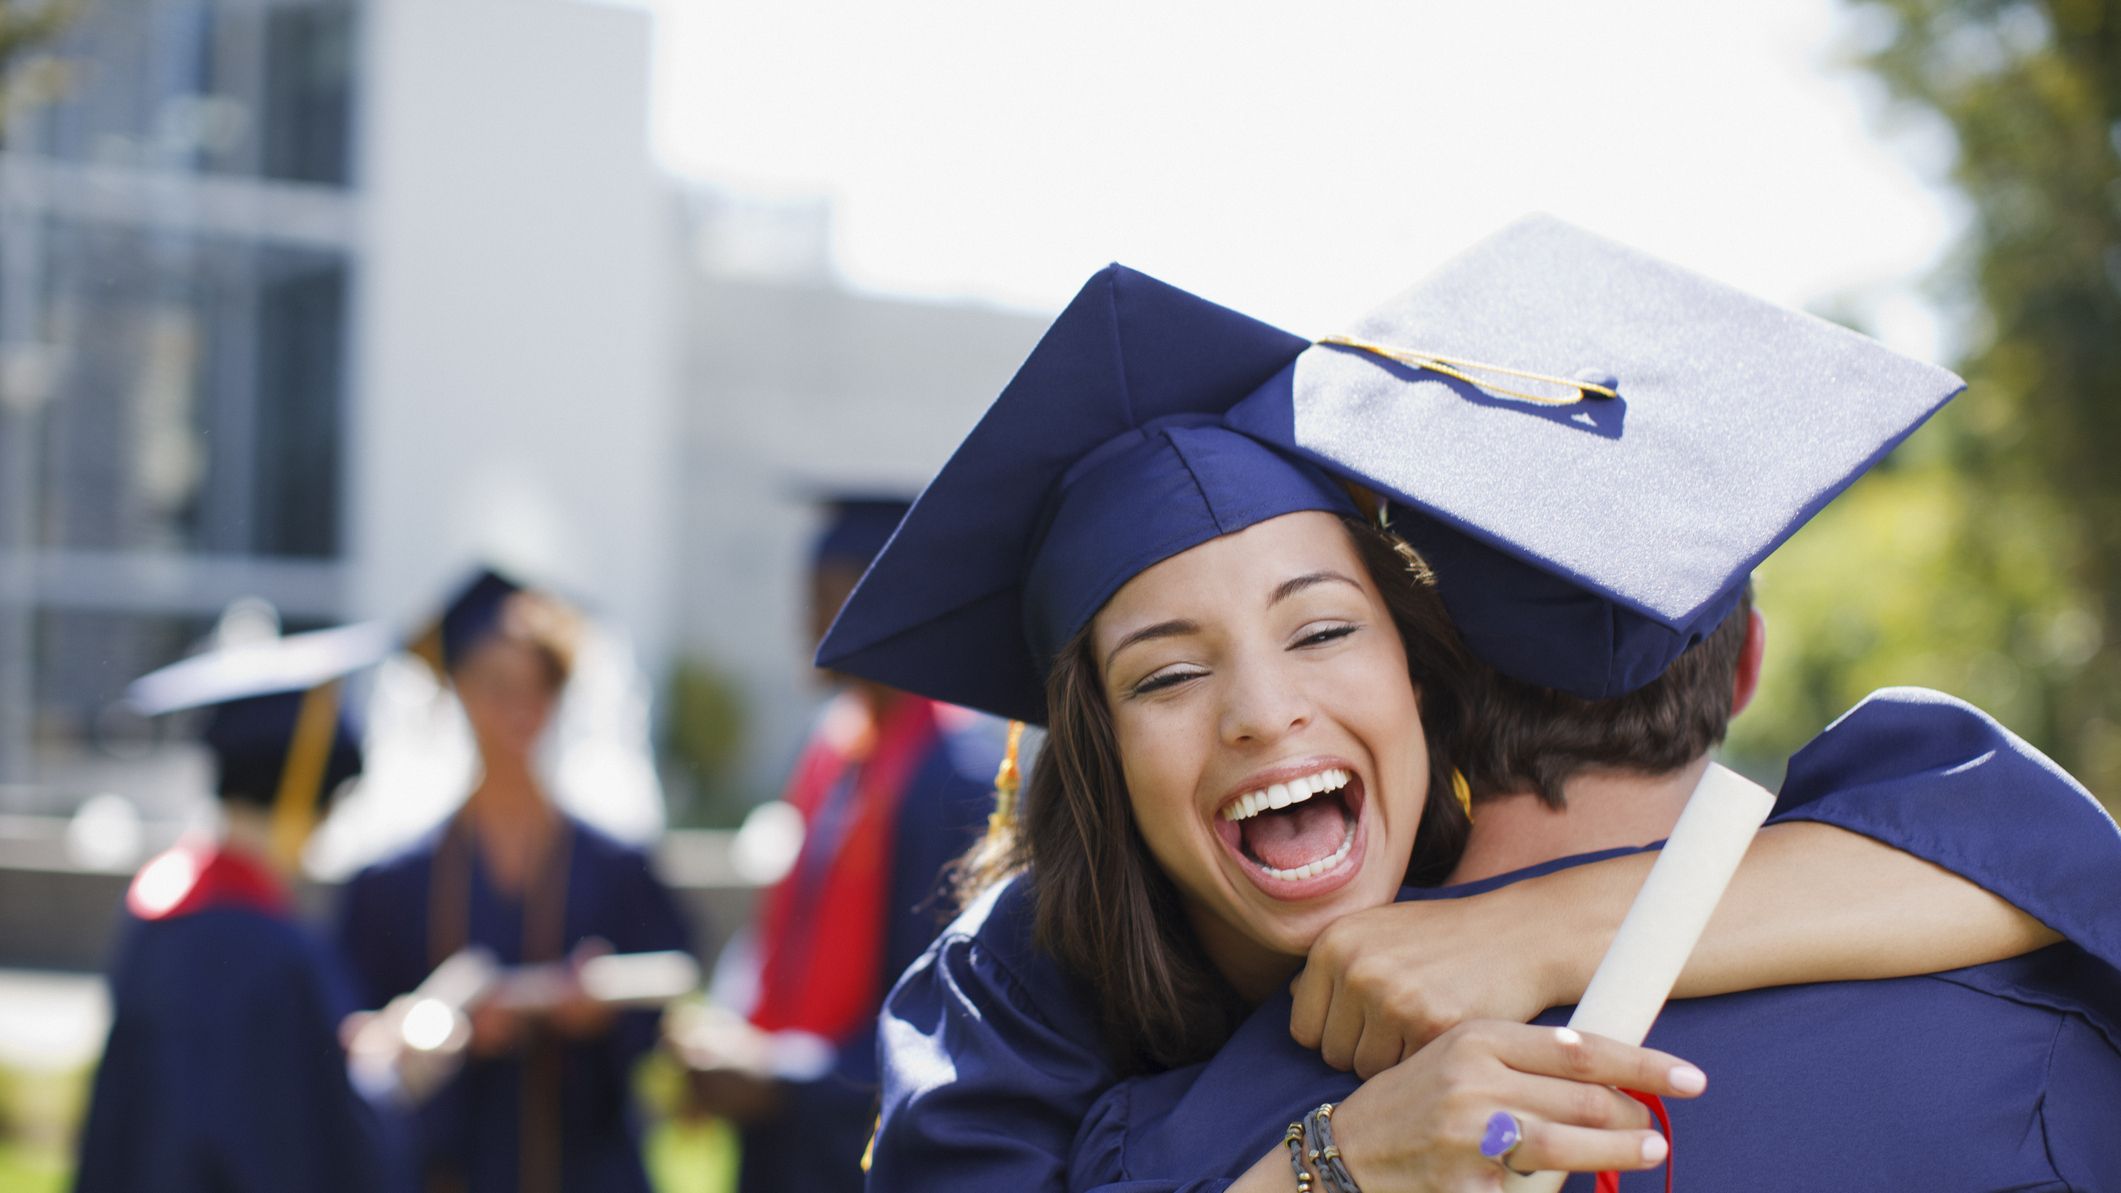 funny middle school graduation quotes